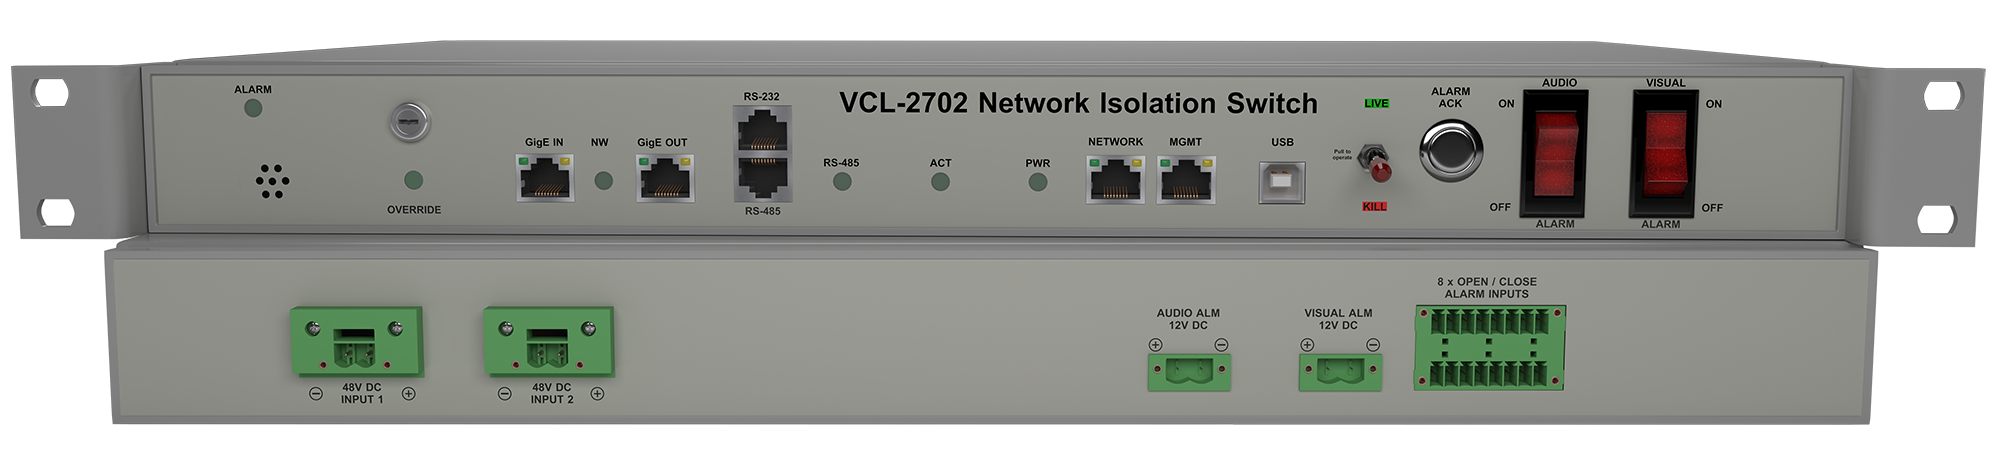 VCL-2702 Network Isolation Switch